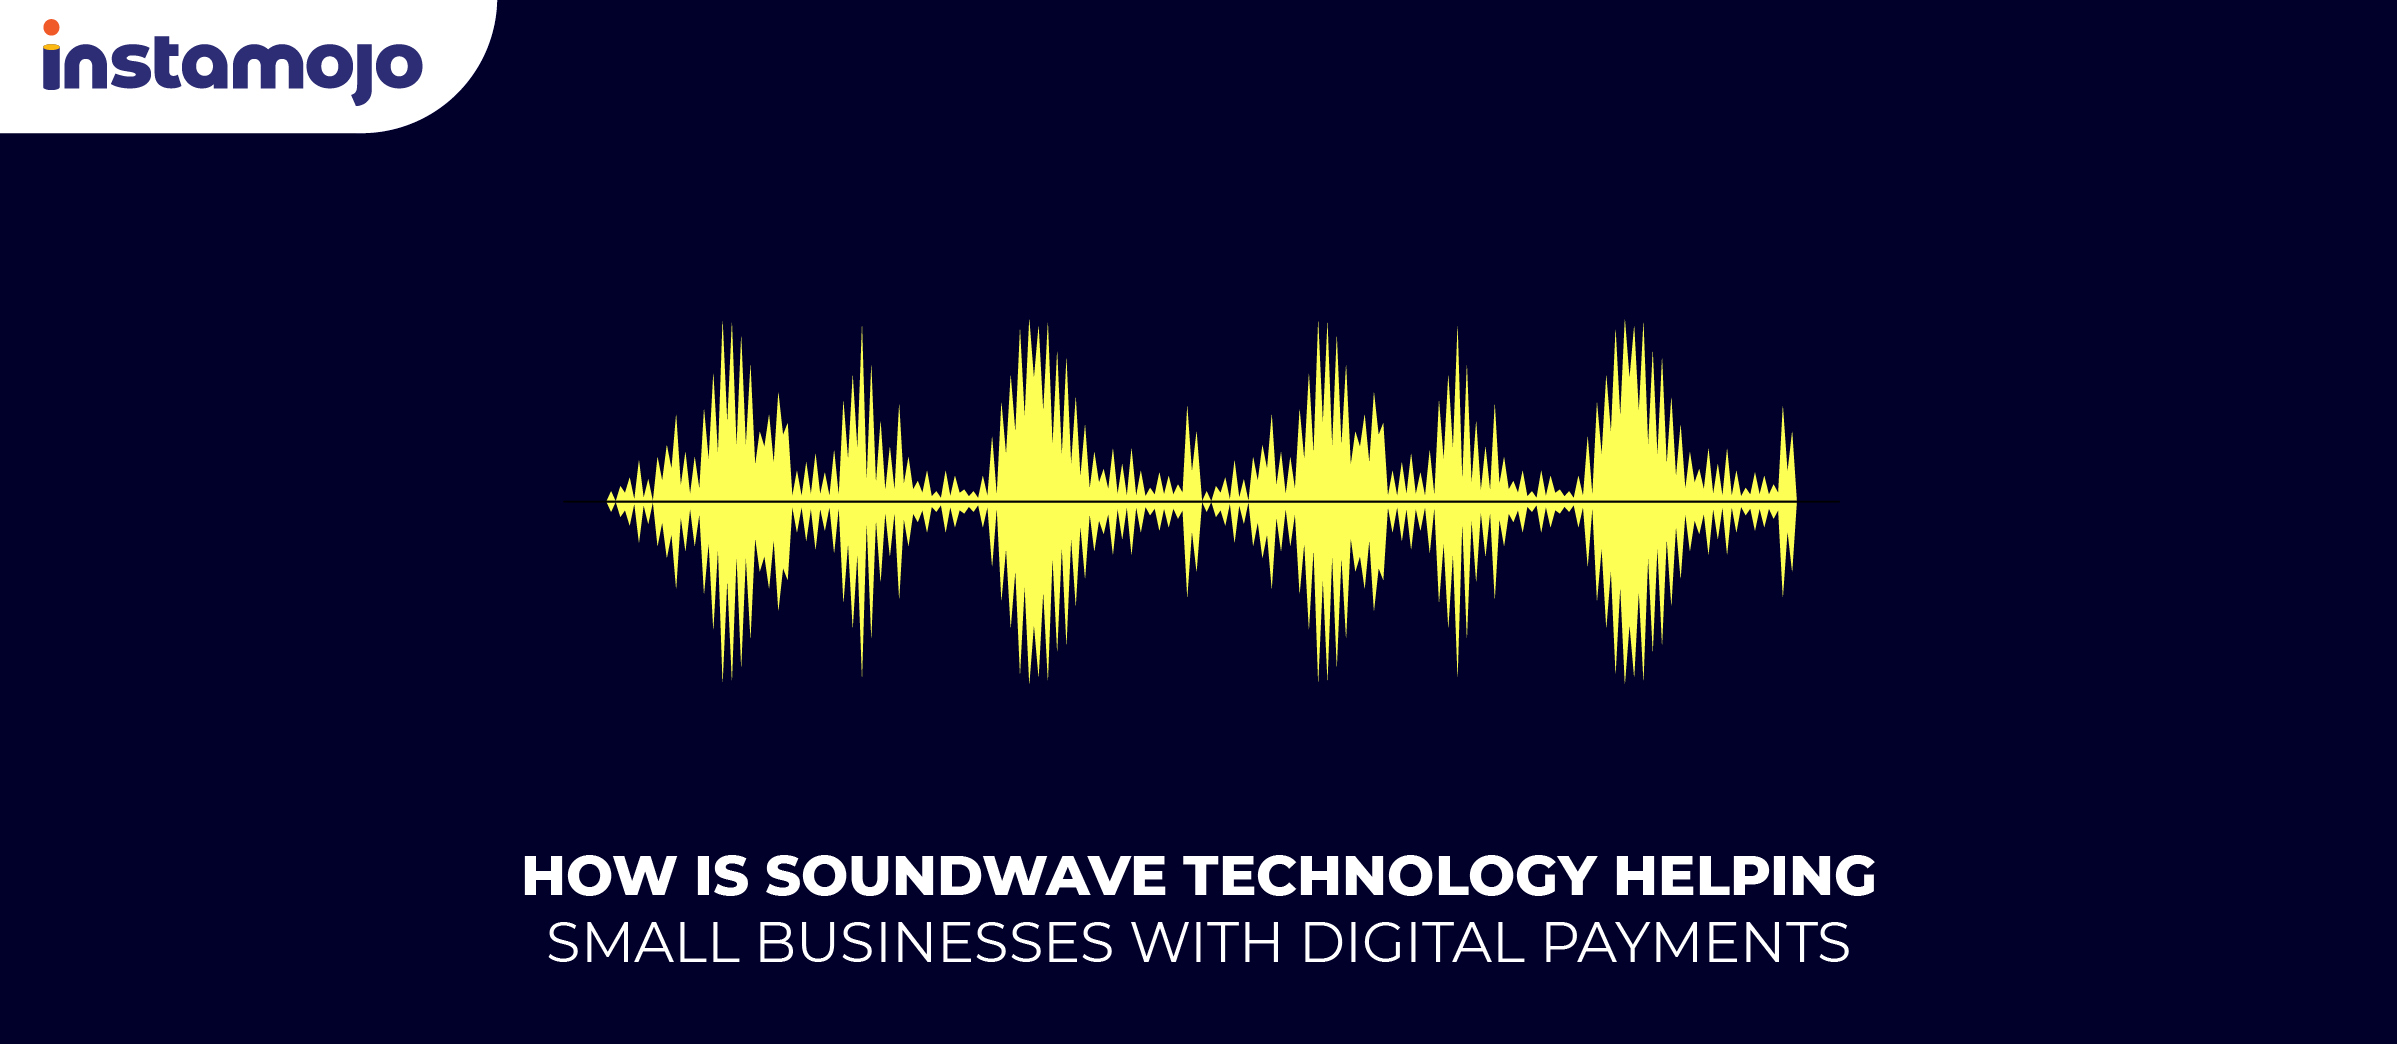 How is Soundwave Technology helping Small Businesses with Digital Payments”